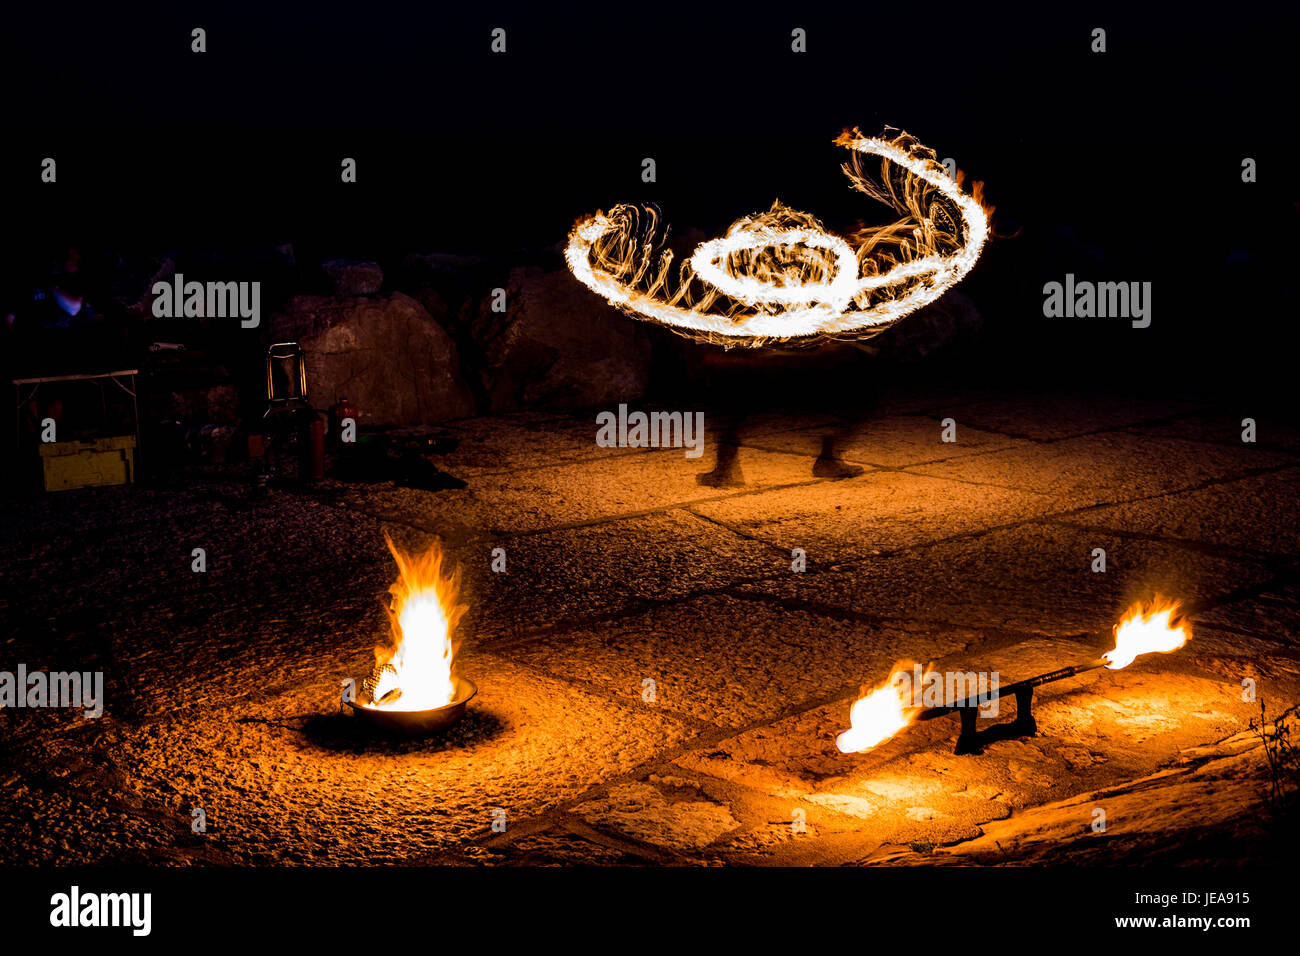 Street artist with a burning stick during his dangerous fire show Stock Photo